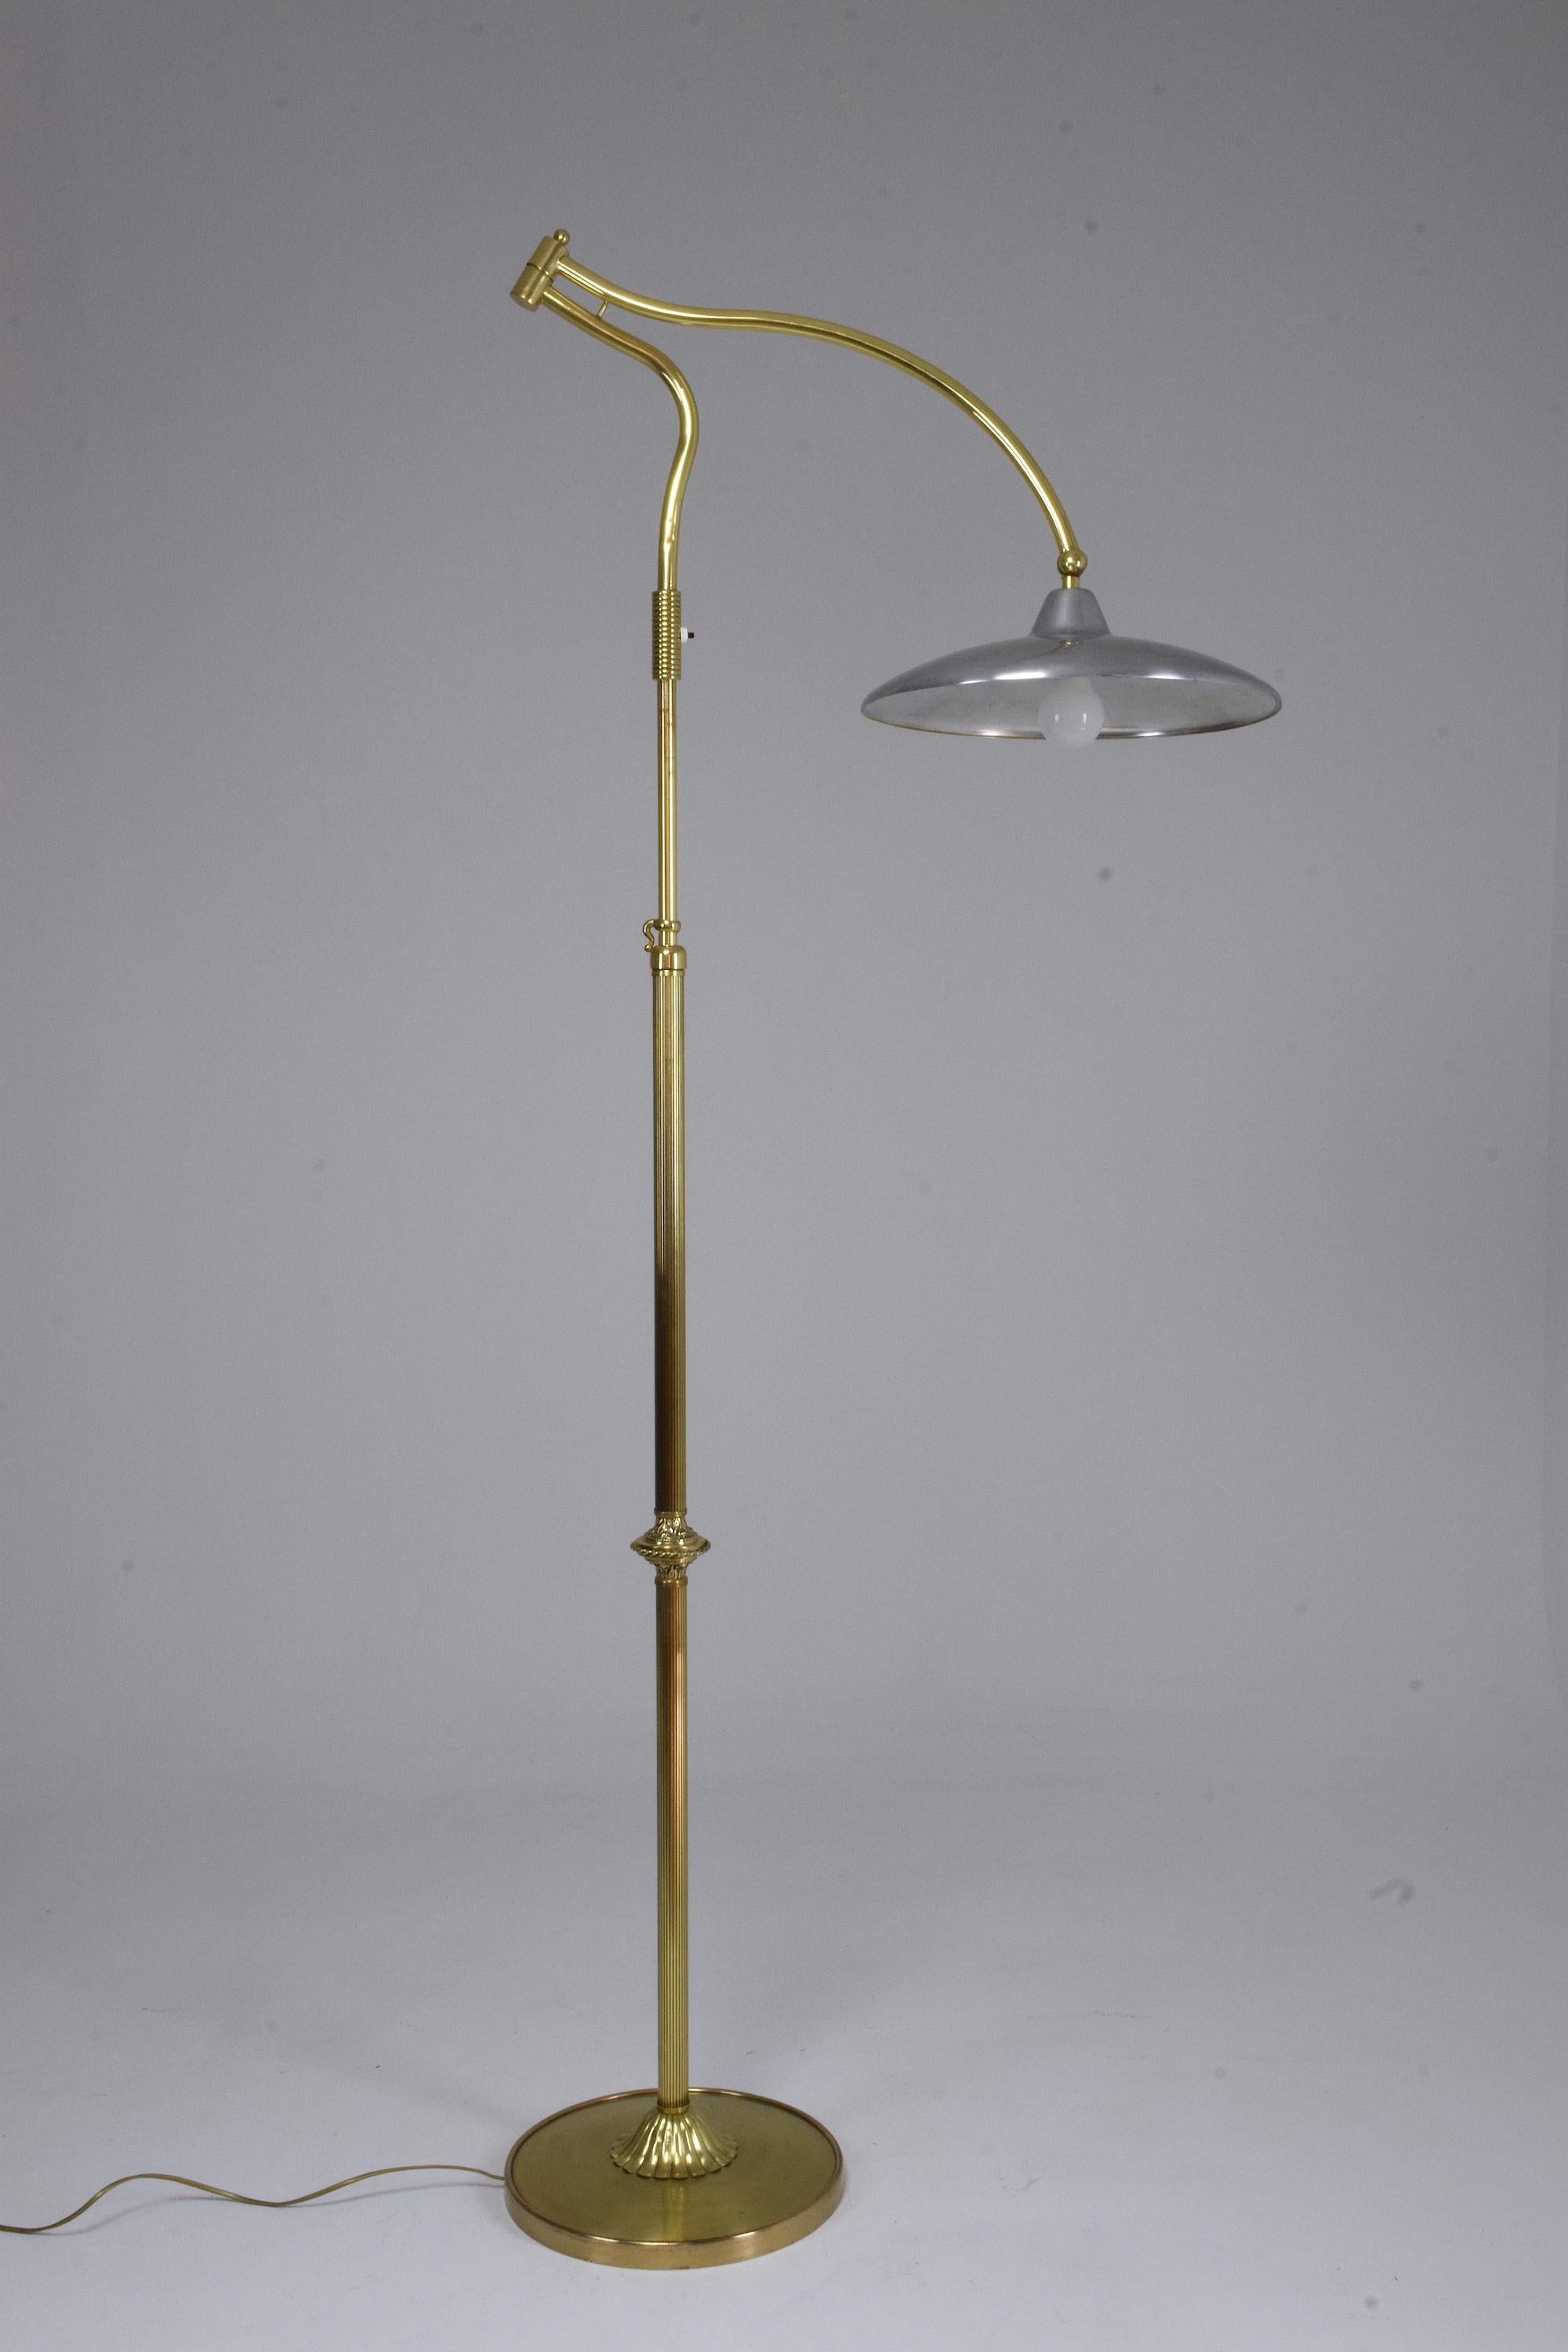 A 20th-century floor lamp manufactured by important Italian manufacturing company Arredoluce in the fifties. This statement light is highlighted by its gold brass structure with molded details and aluminum shade. It is designed with a push-type